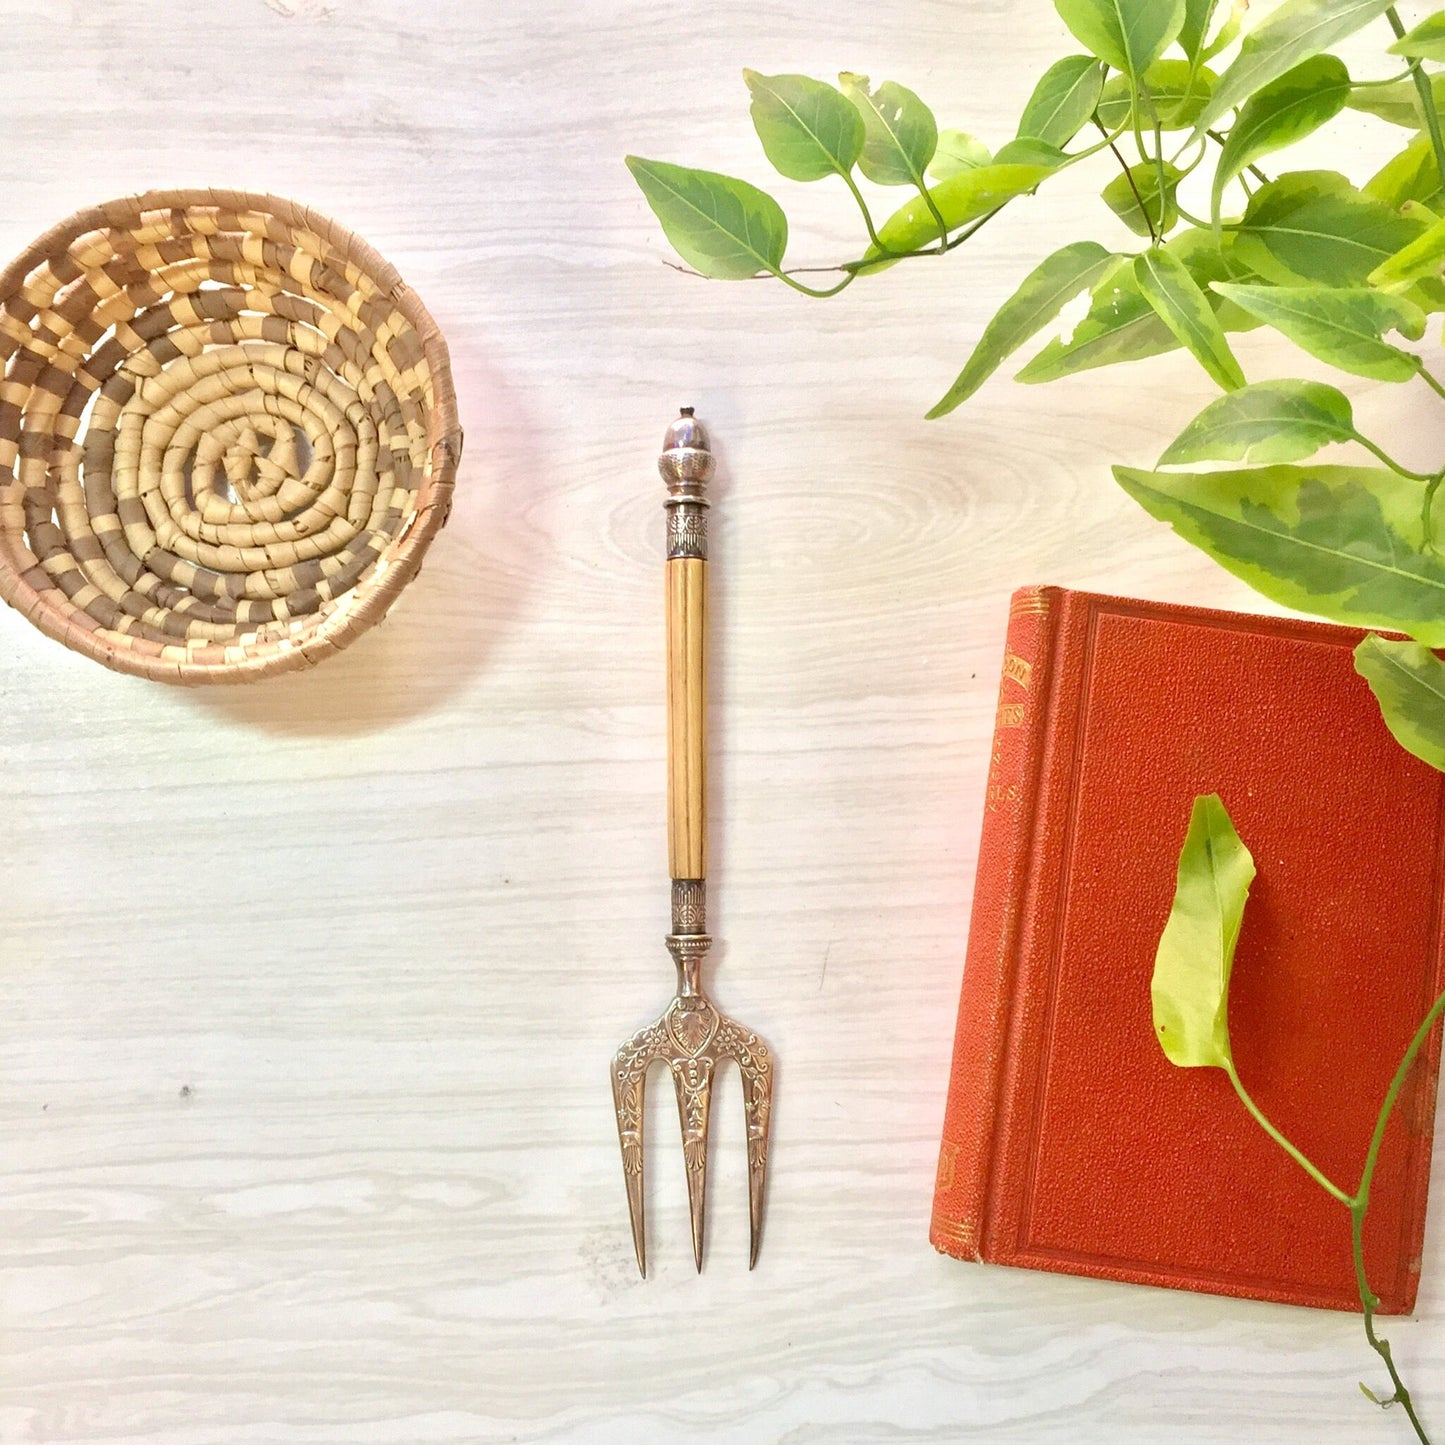 Antique Victorian bread fork with engraved bone handle, displayed next to a woven basket and book, surrounded by greenery on a textured background.